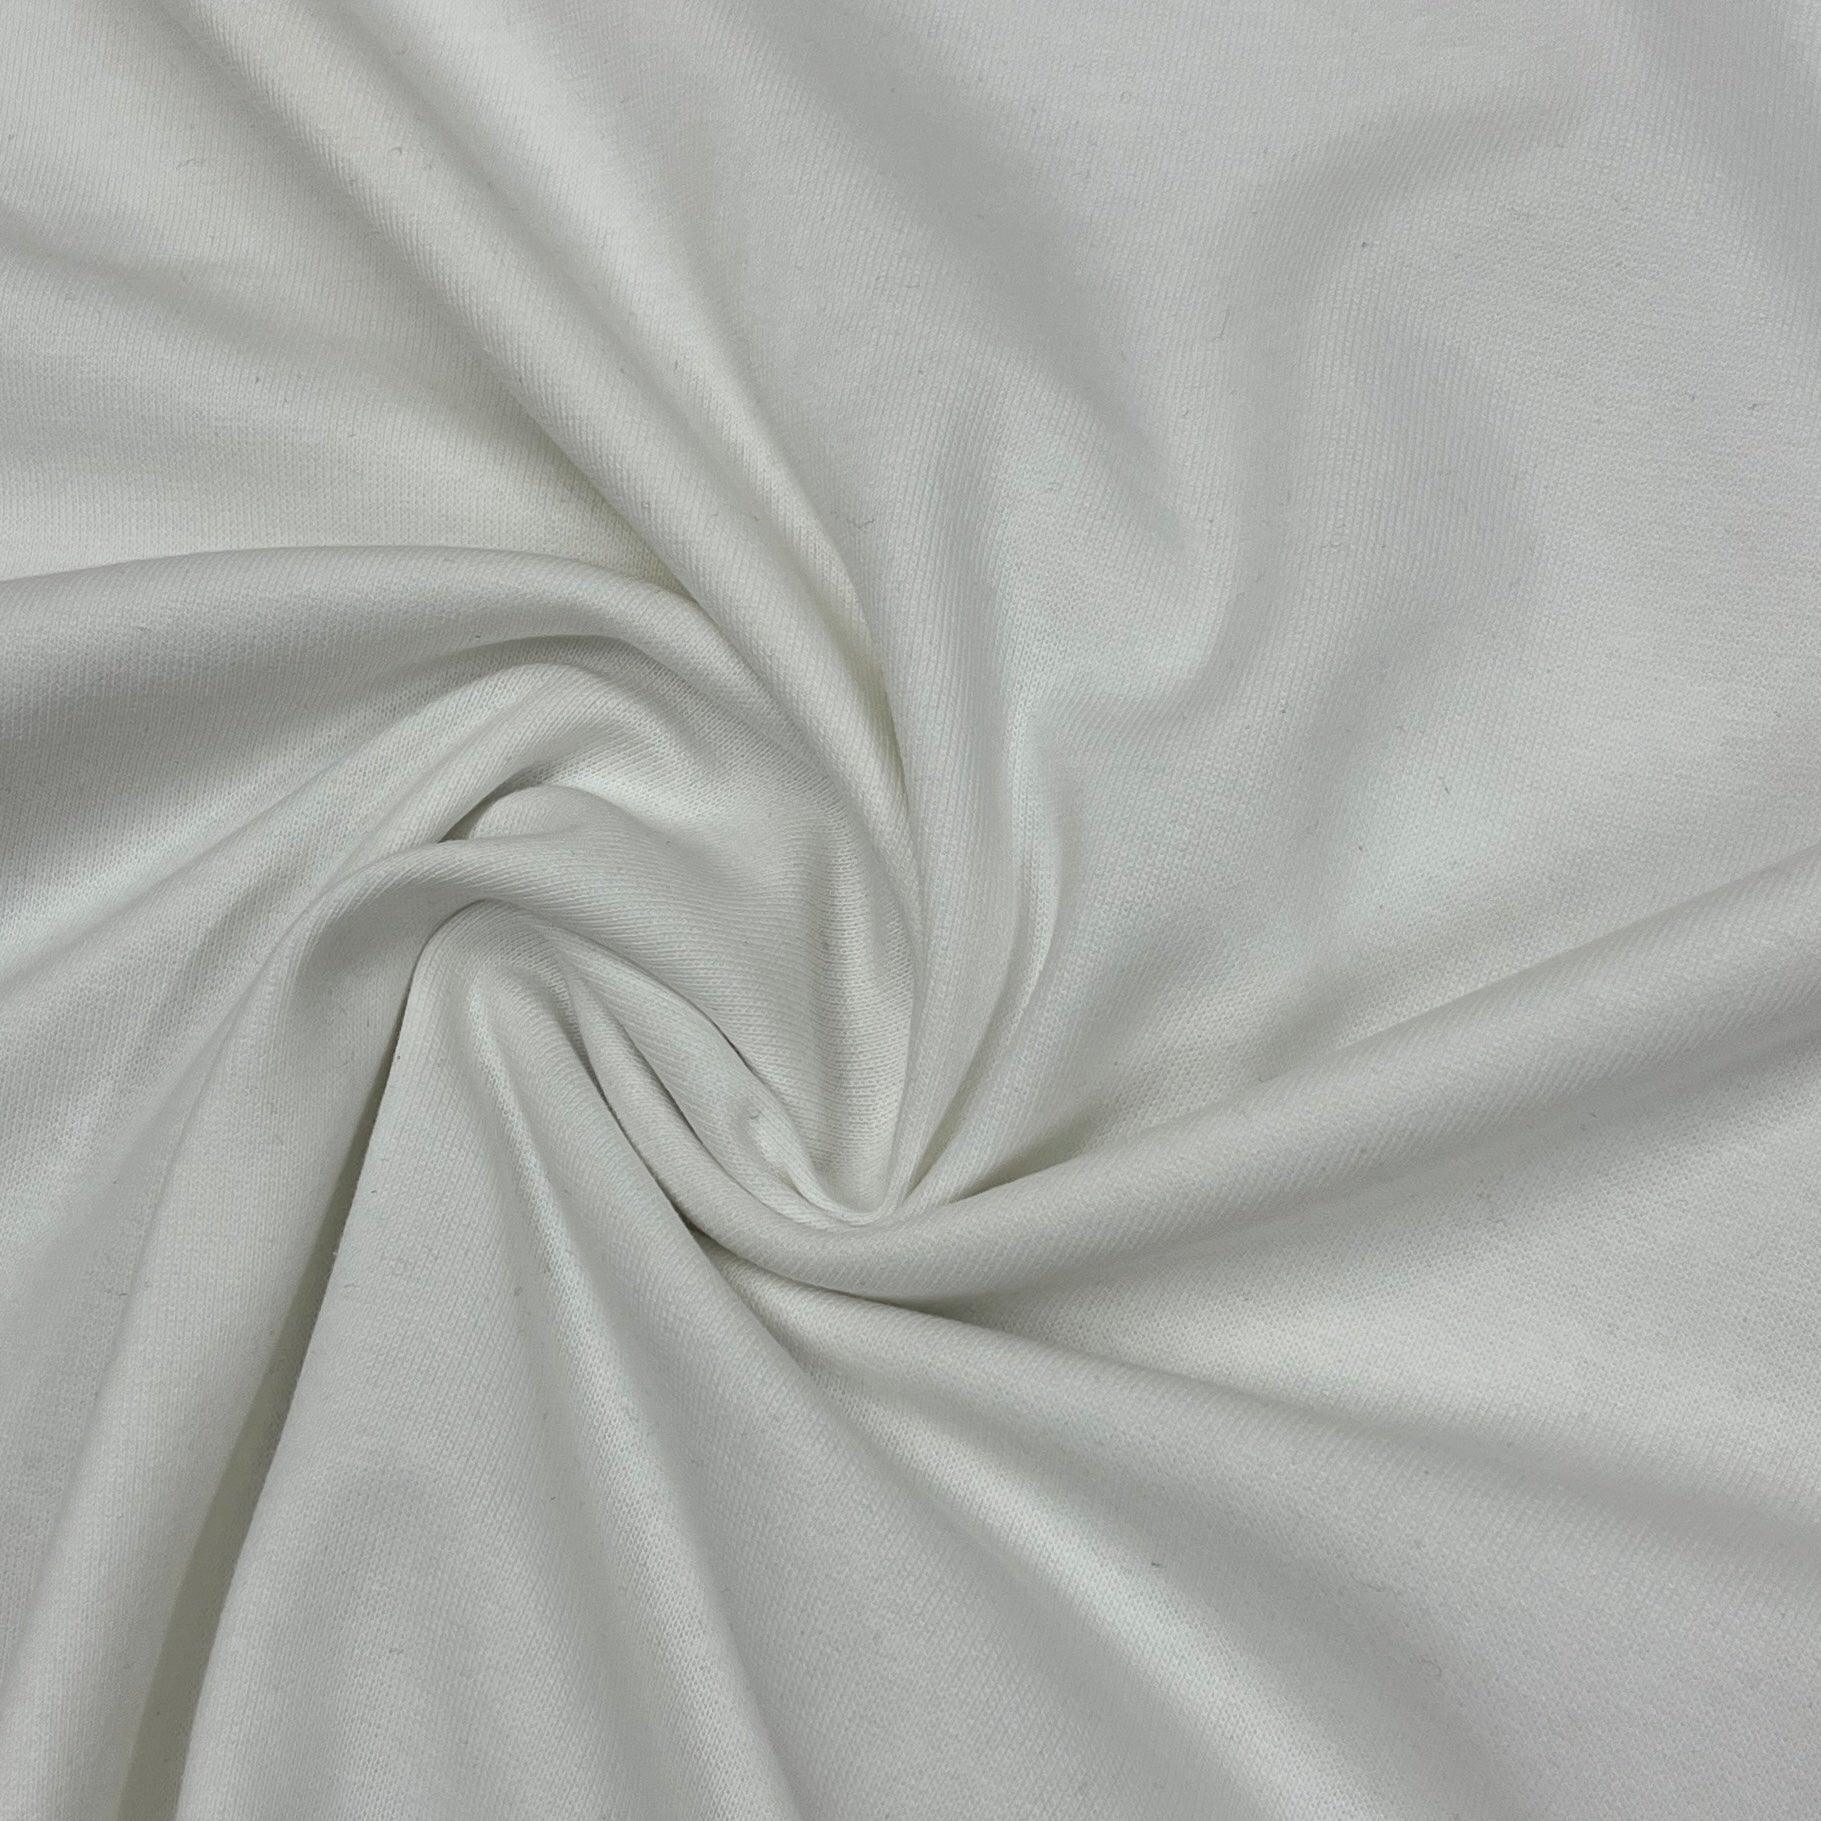 Heavy Off-White Organic Cotton Rib Knit Fabric - Grown in the USA - 54" wide - Nature's Fabrics